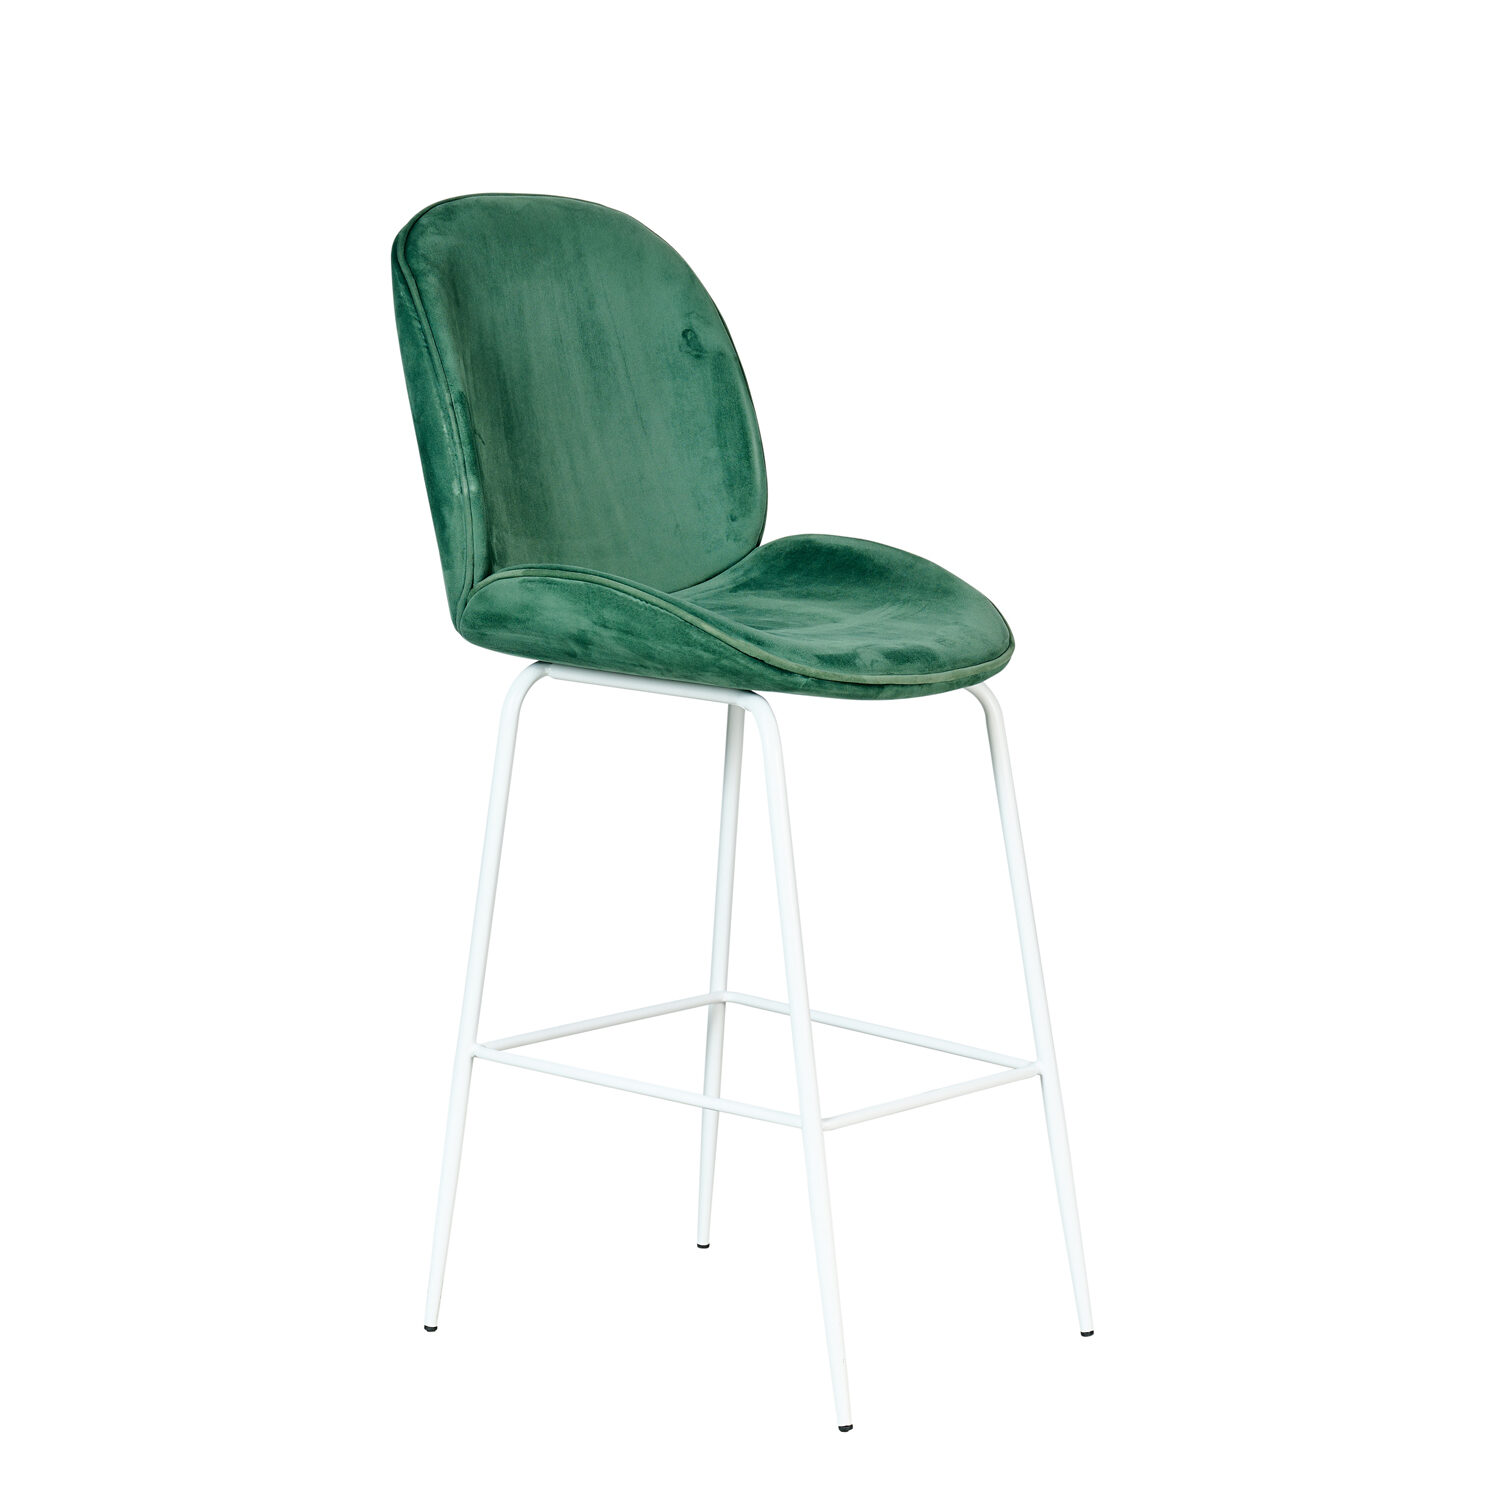 Harlow Stool - Forest Green / White Legs - Event Artillery